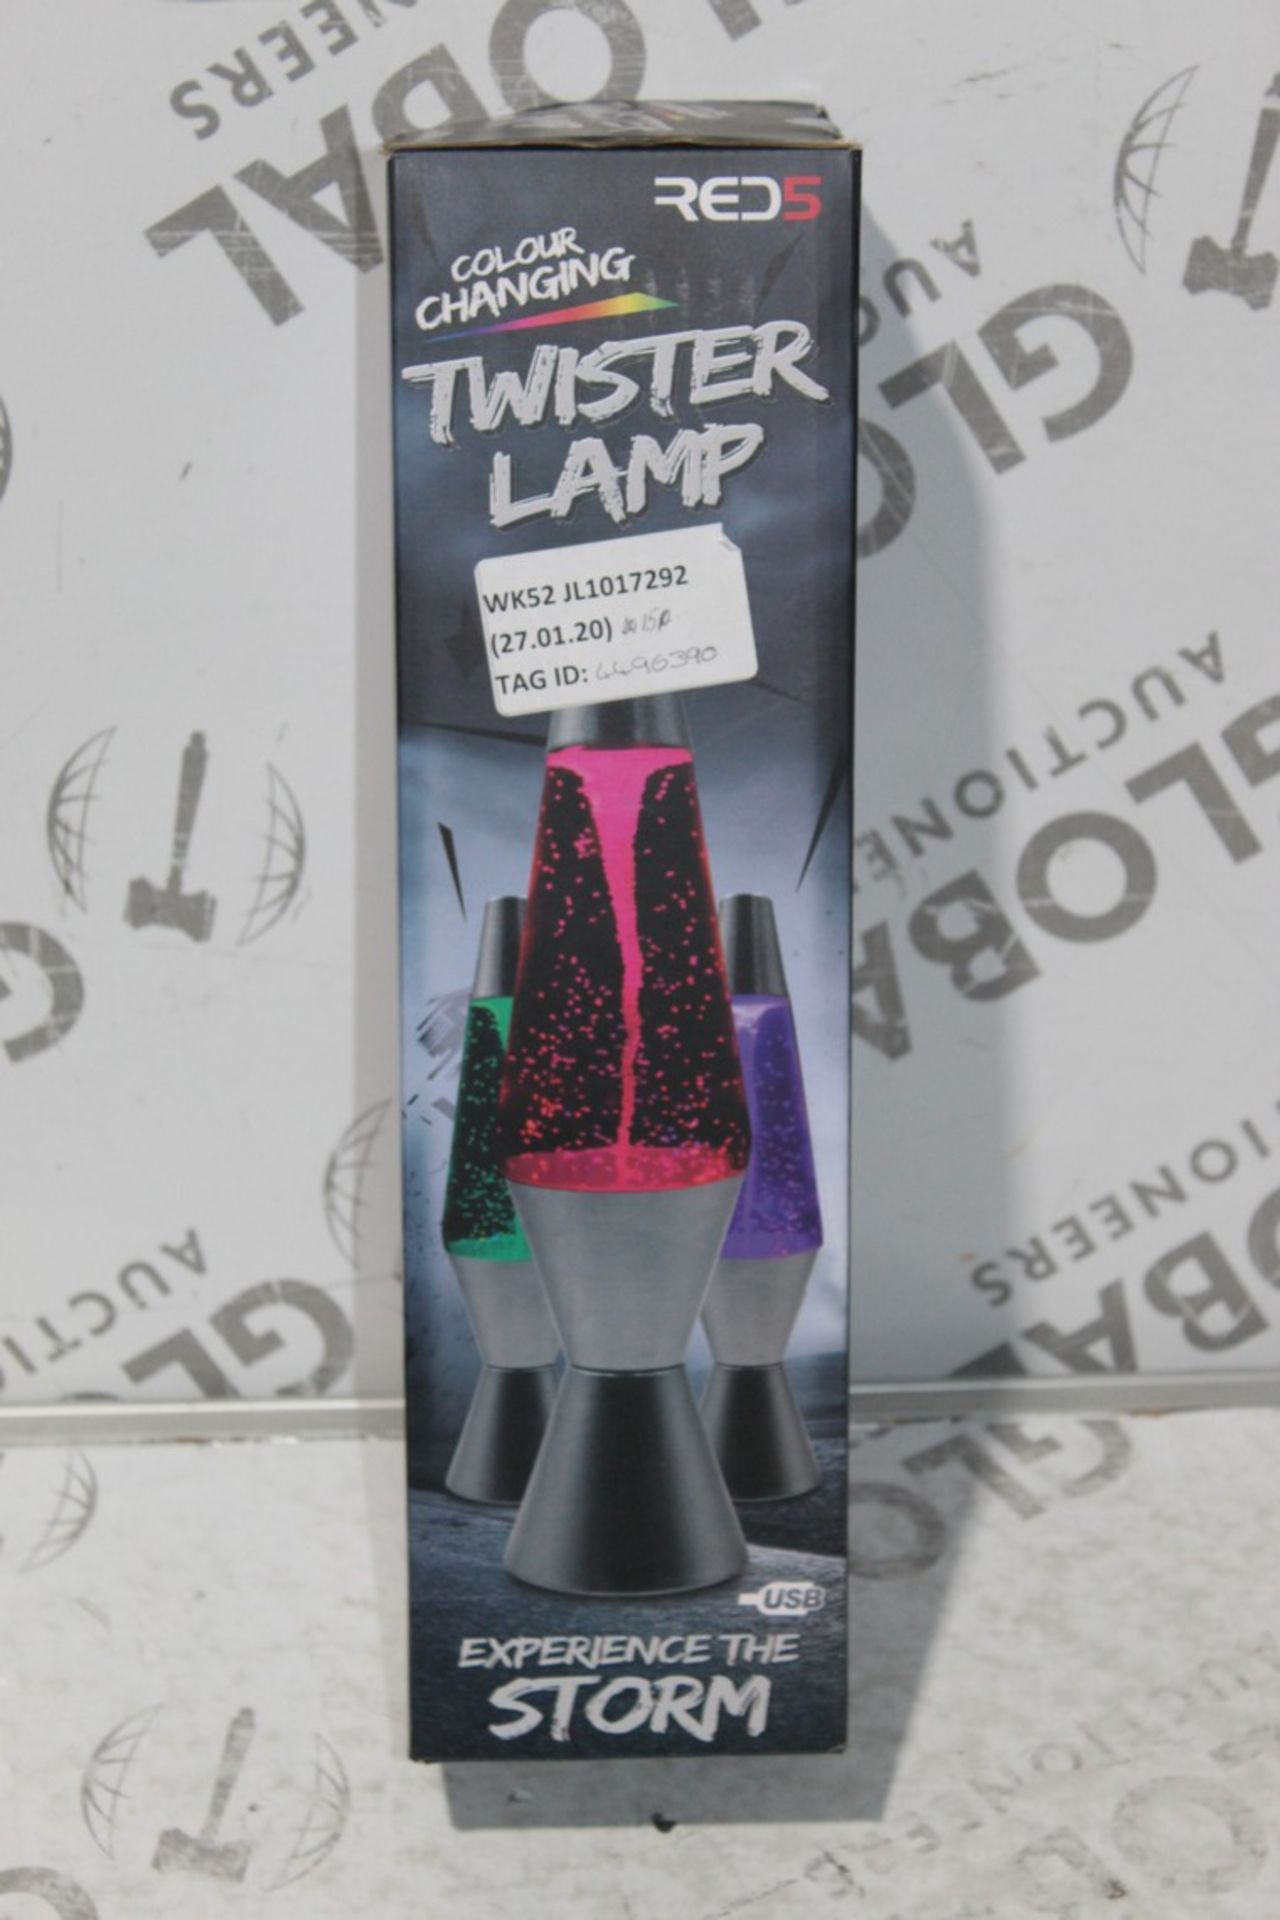 Boxed Red 5 Colour Changing Twister Lamps, RRP£20.00 EACH (4496390) (RET00951591) (RET00172821) (